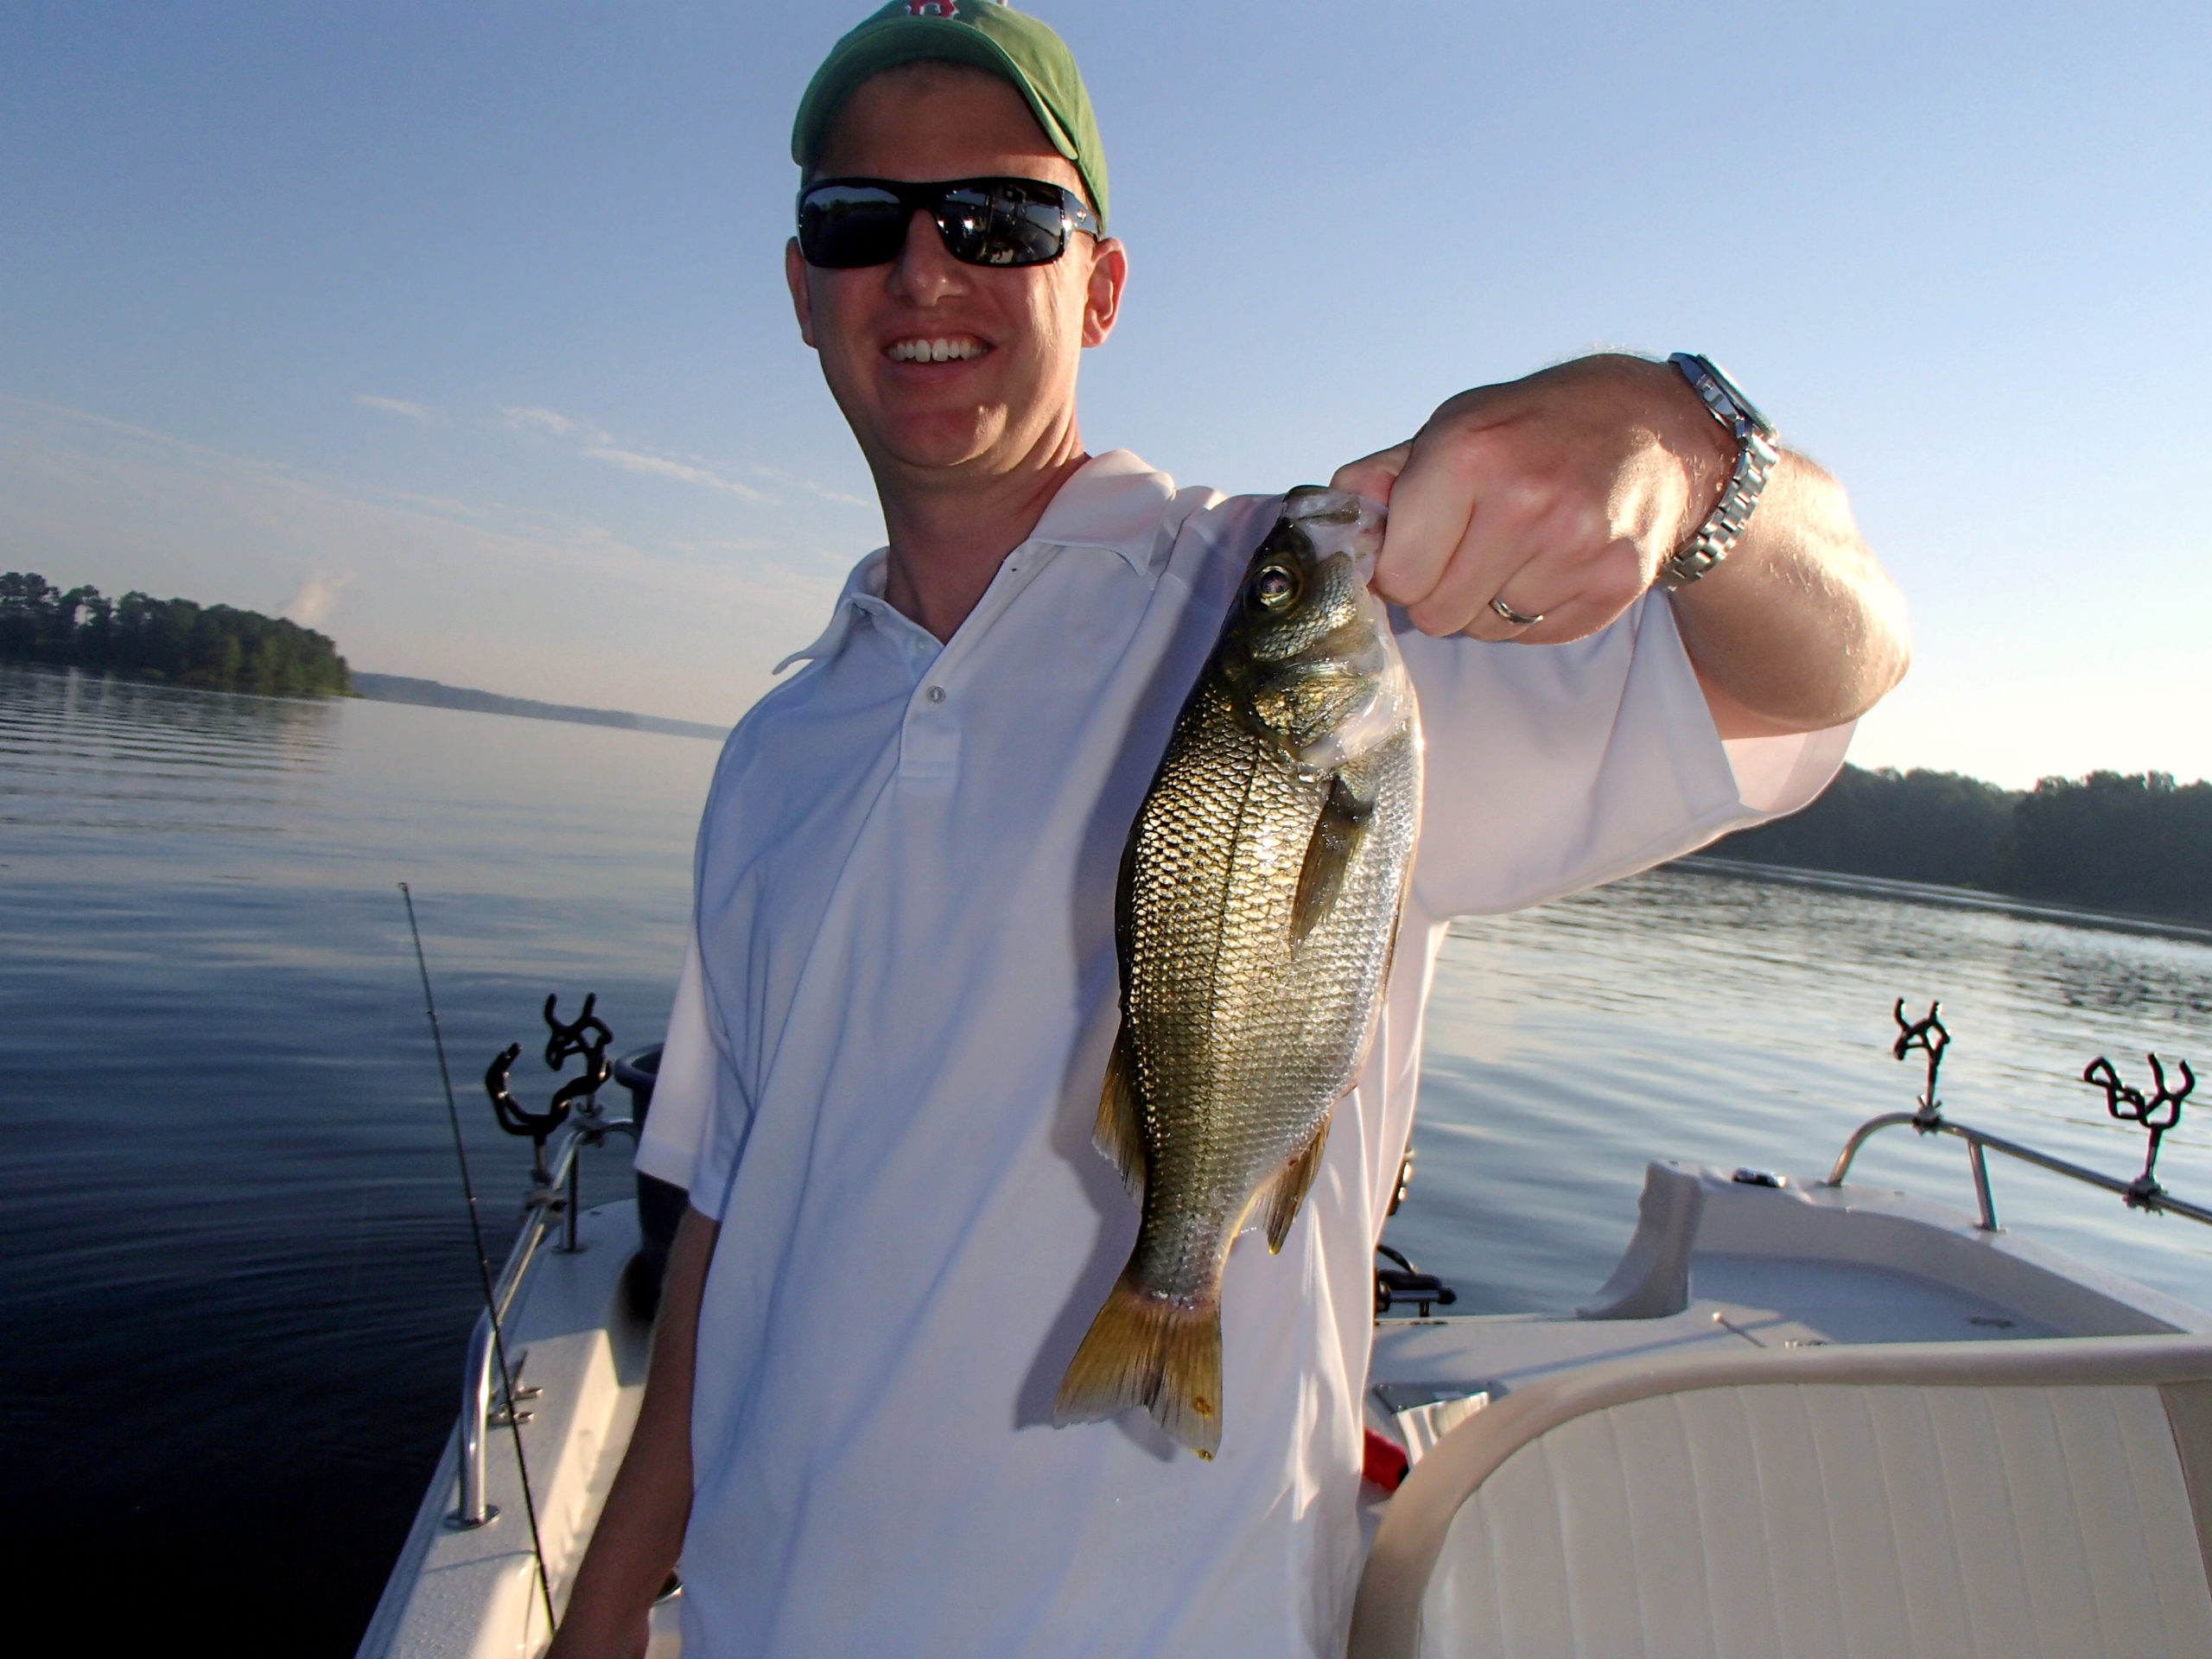 White perch are providing fishermen at North Carolina's Shearon Harris Lake  with another summer target